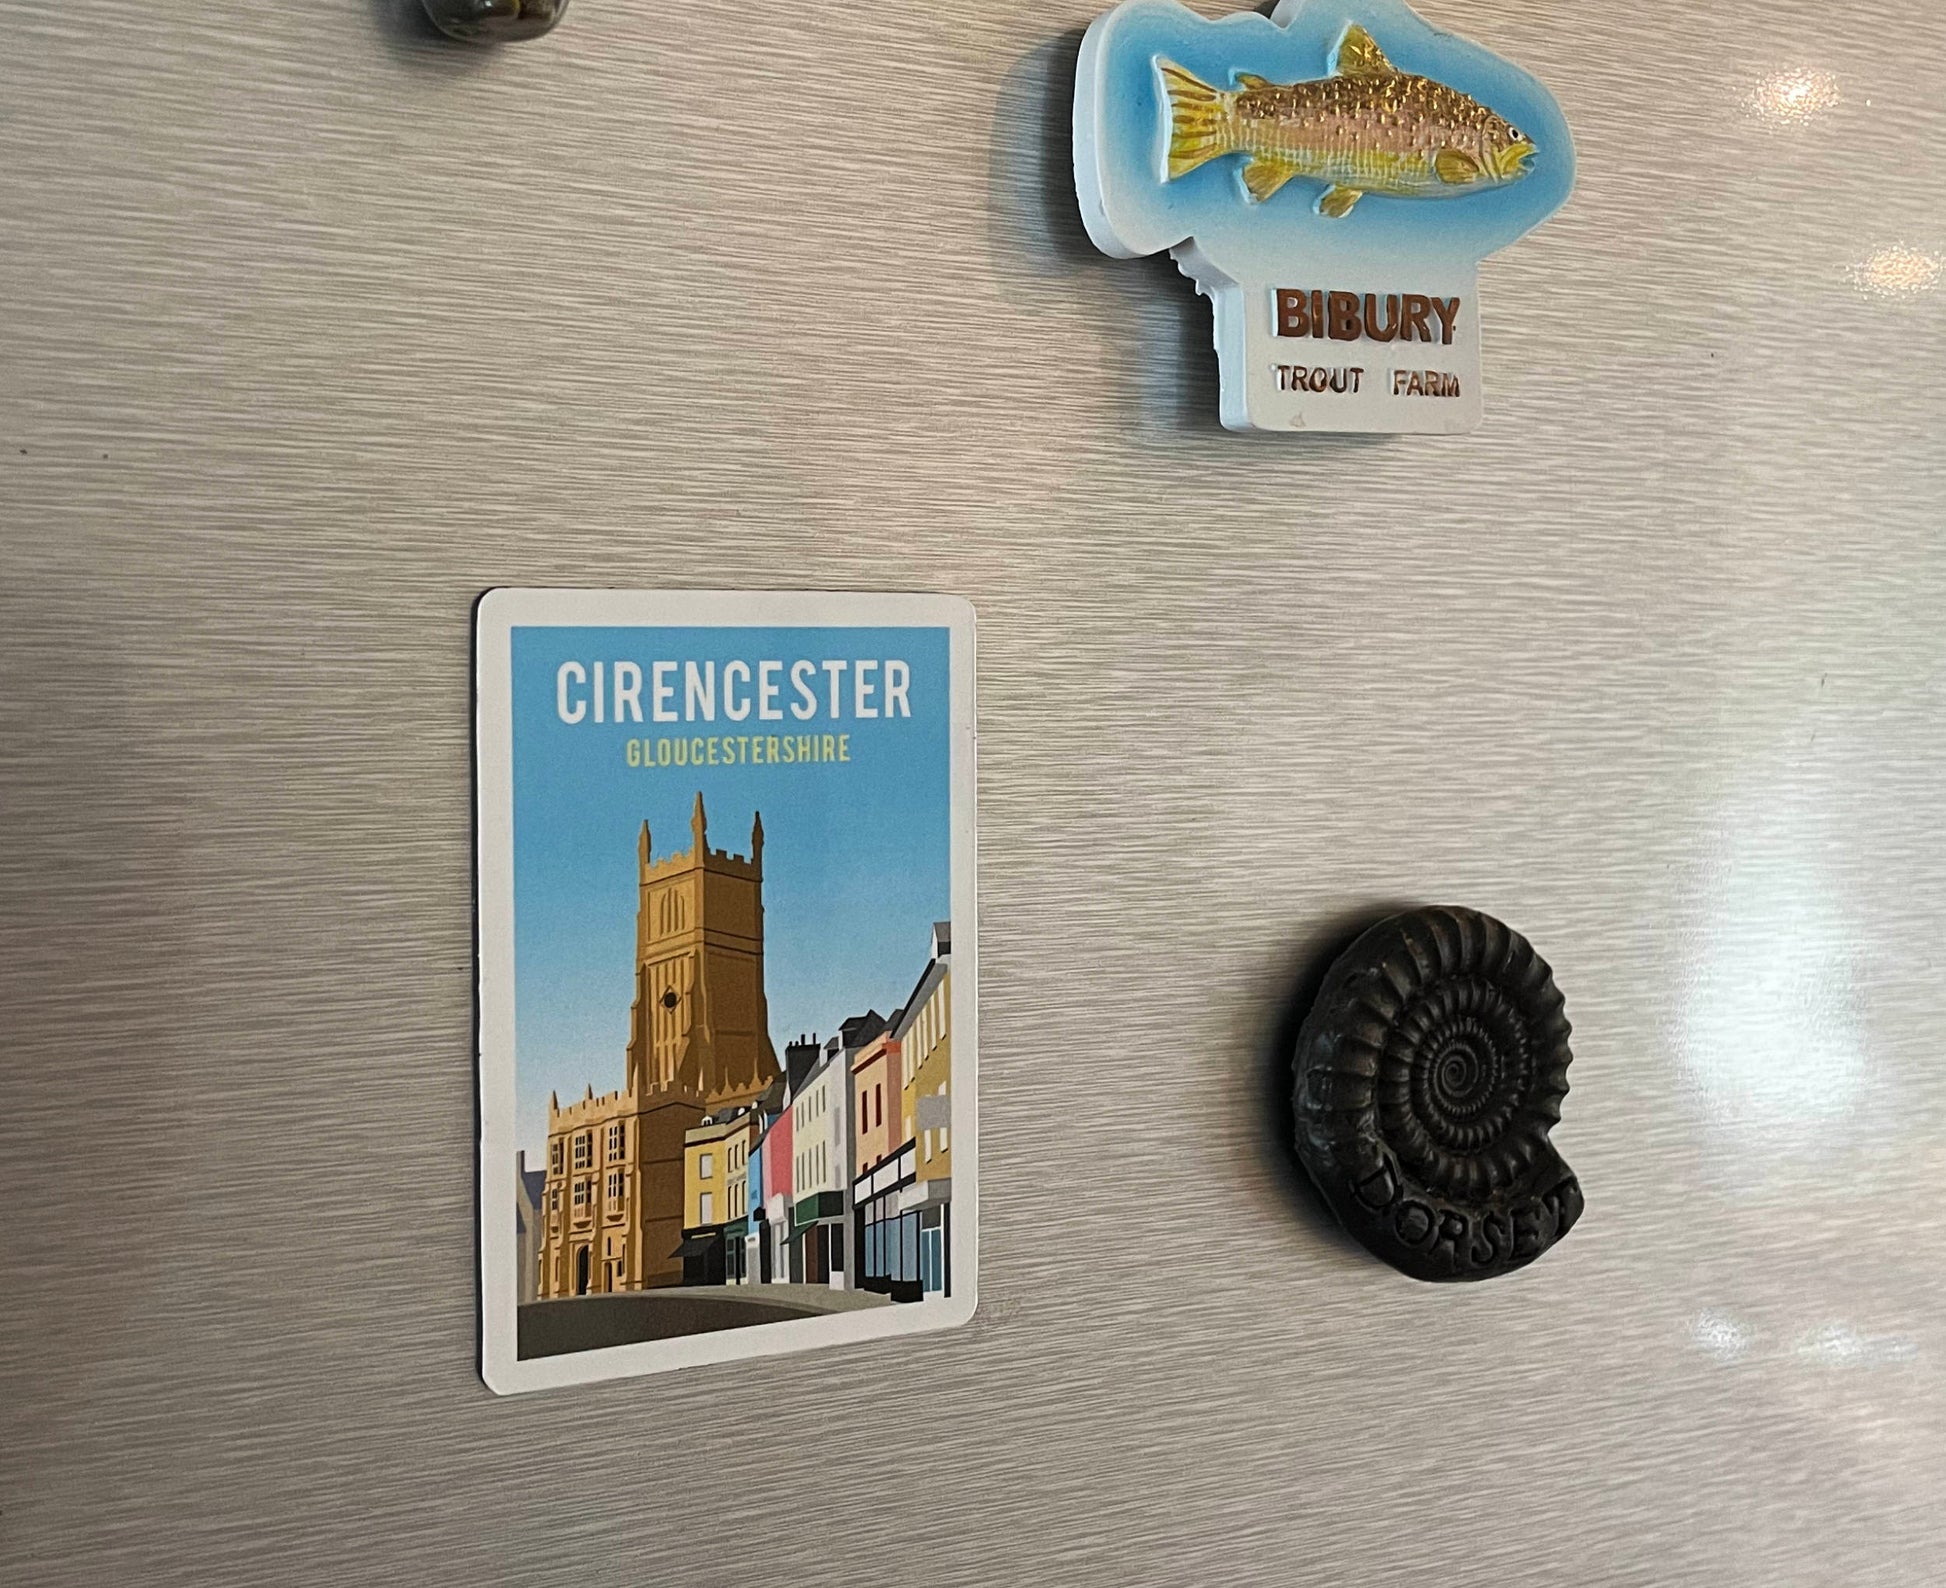 Cirencester magnet on fridge with other magnets